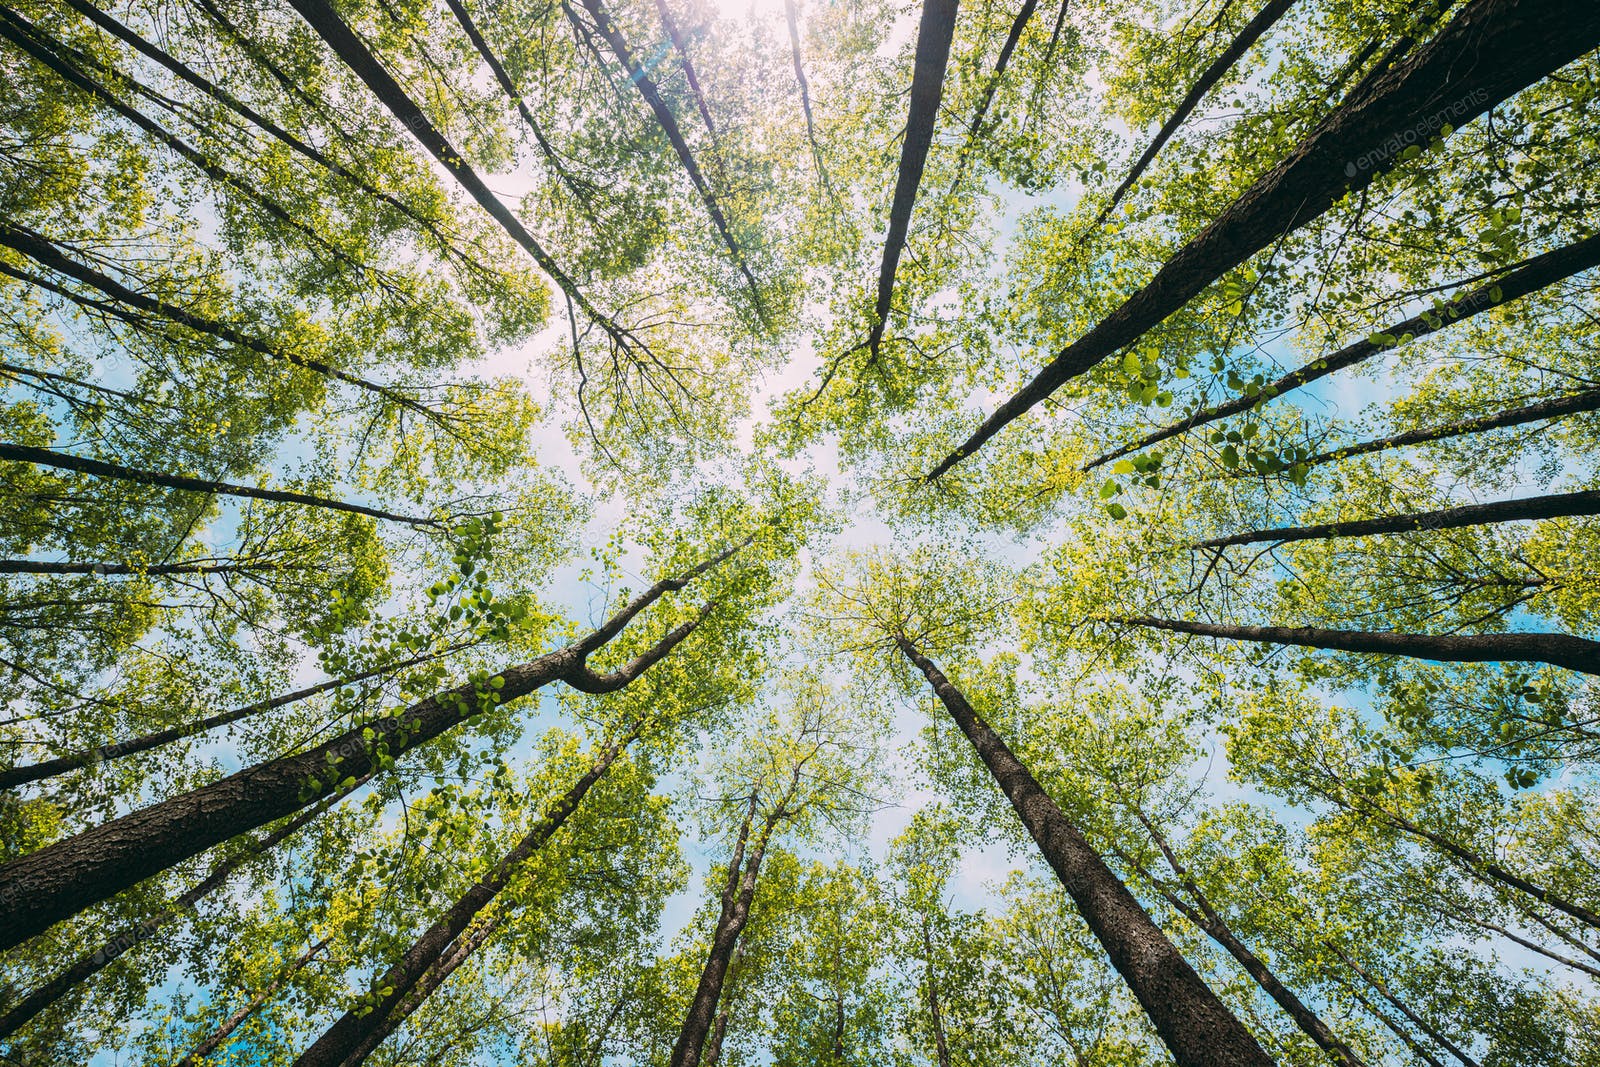 Looking Up In Beautiful Pine Deciduous Forest Trees Woods Canopy. Bottom View Wide Angle Background photo by Grigory_bruev on Envato Elements